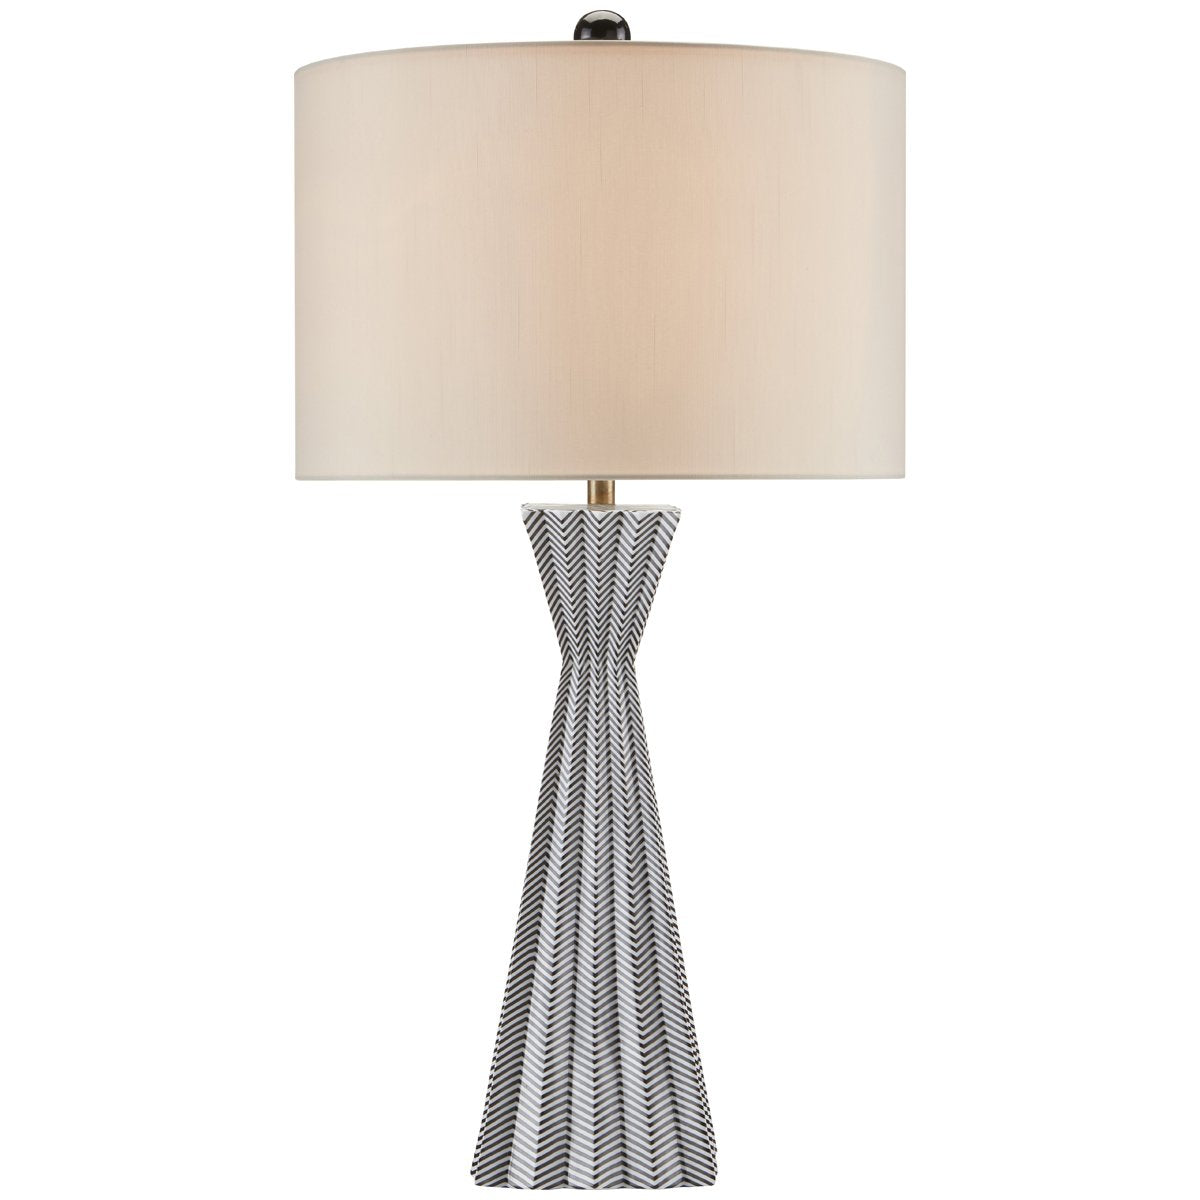 Currey and Company Fabienne Table Lamp